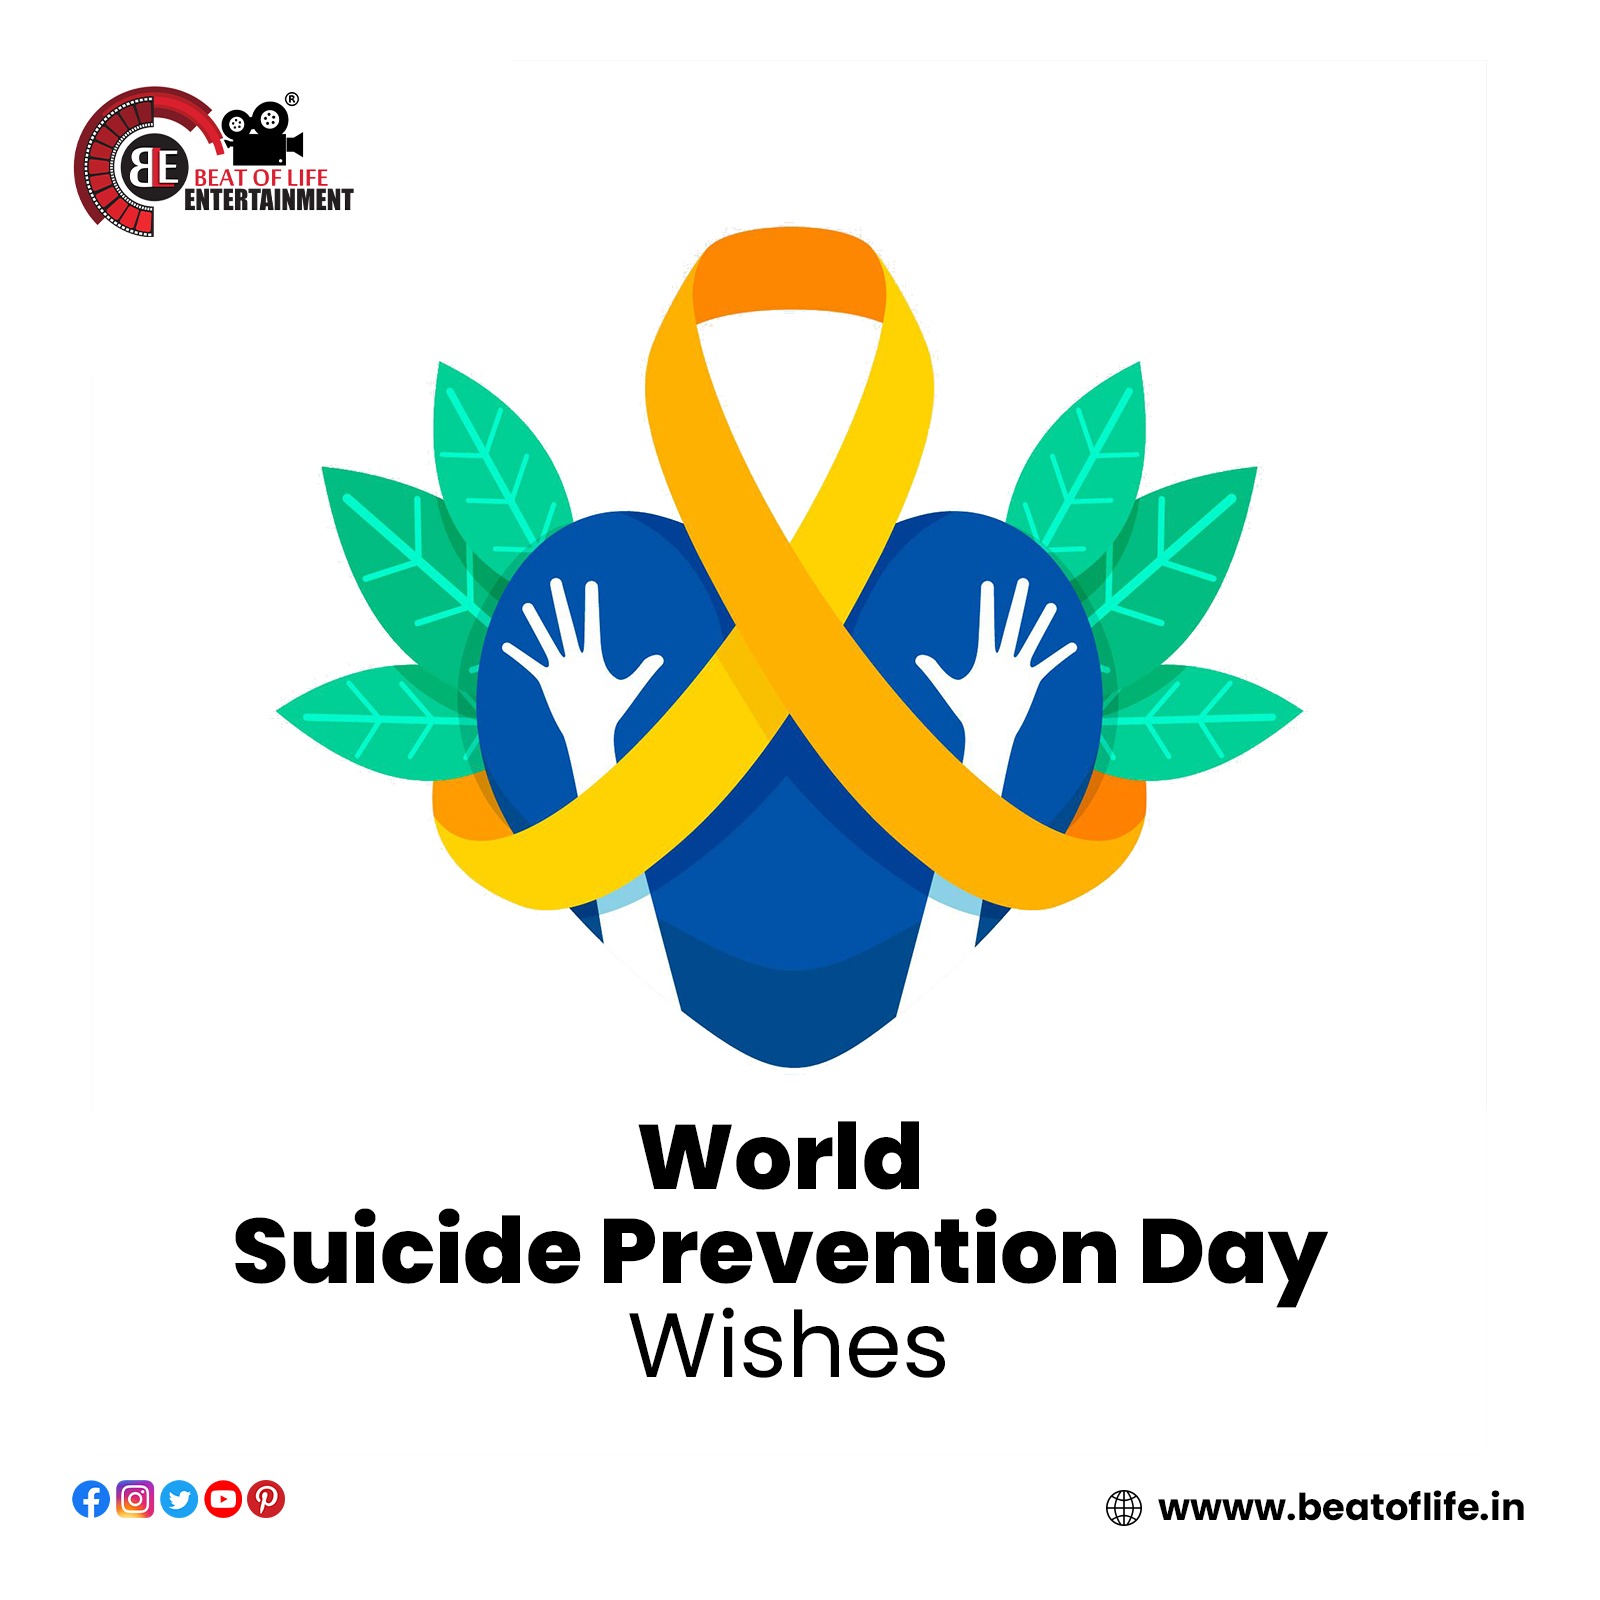 World Suicide Prevention Day Wishes